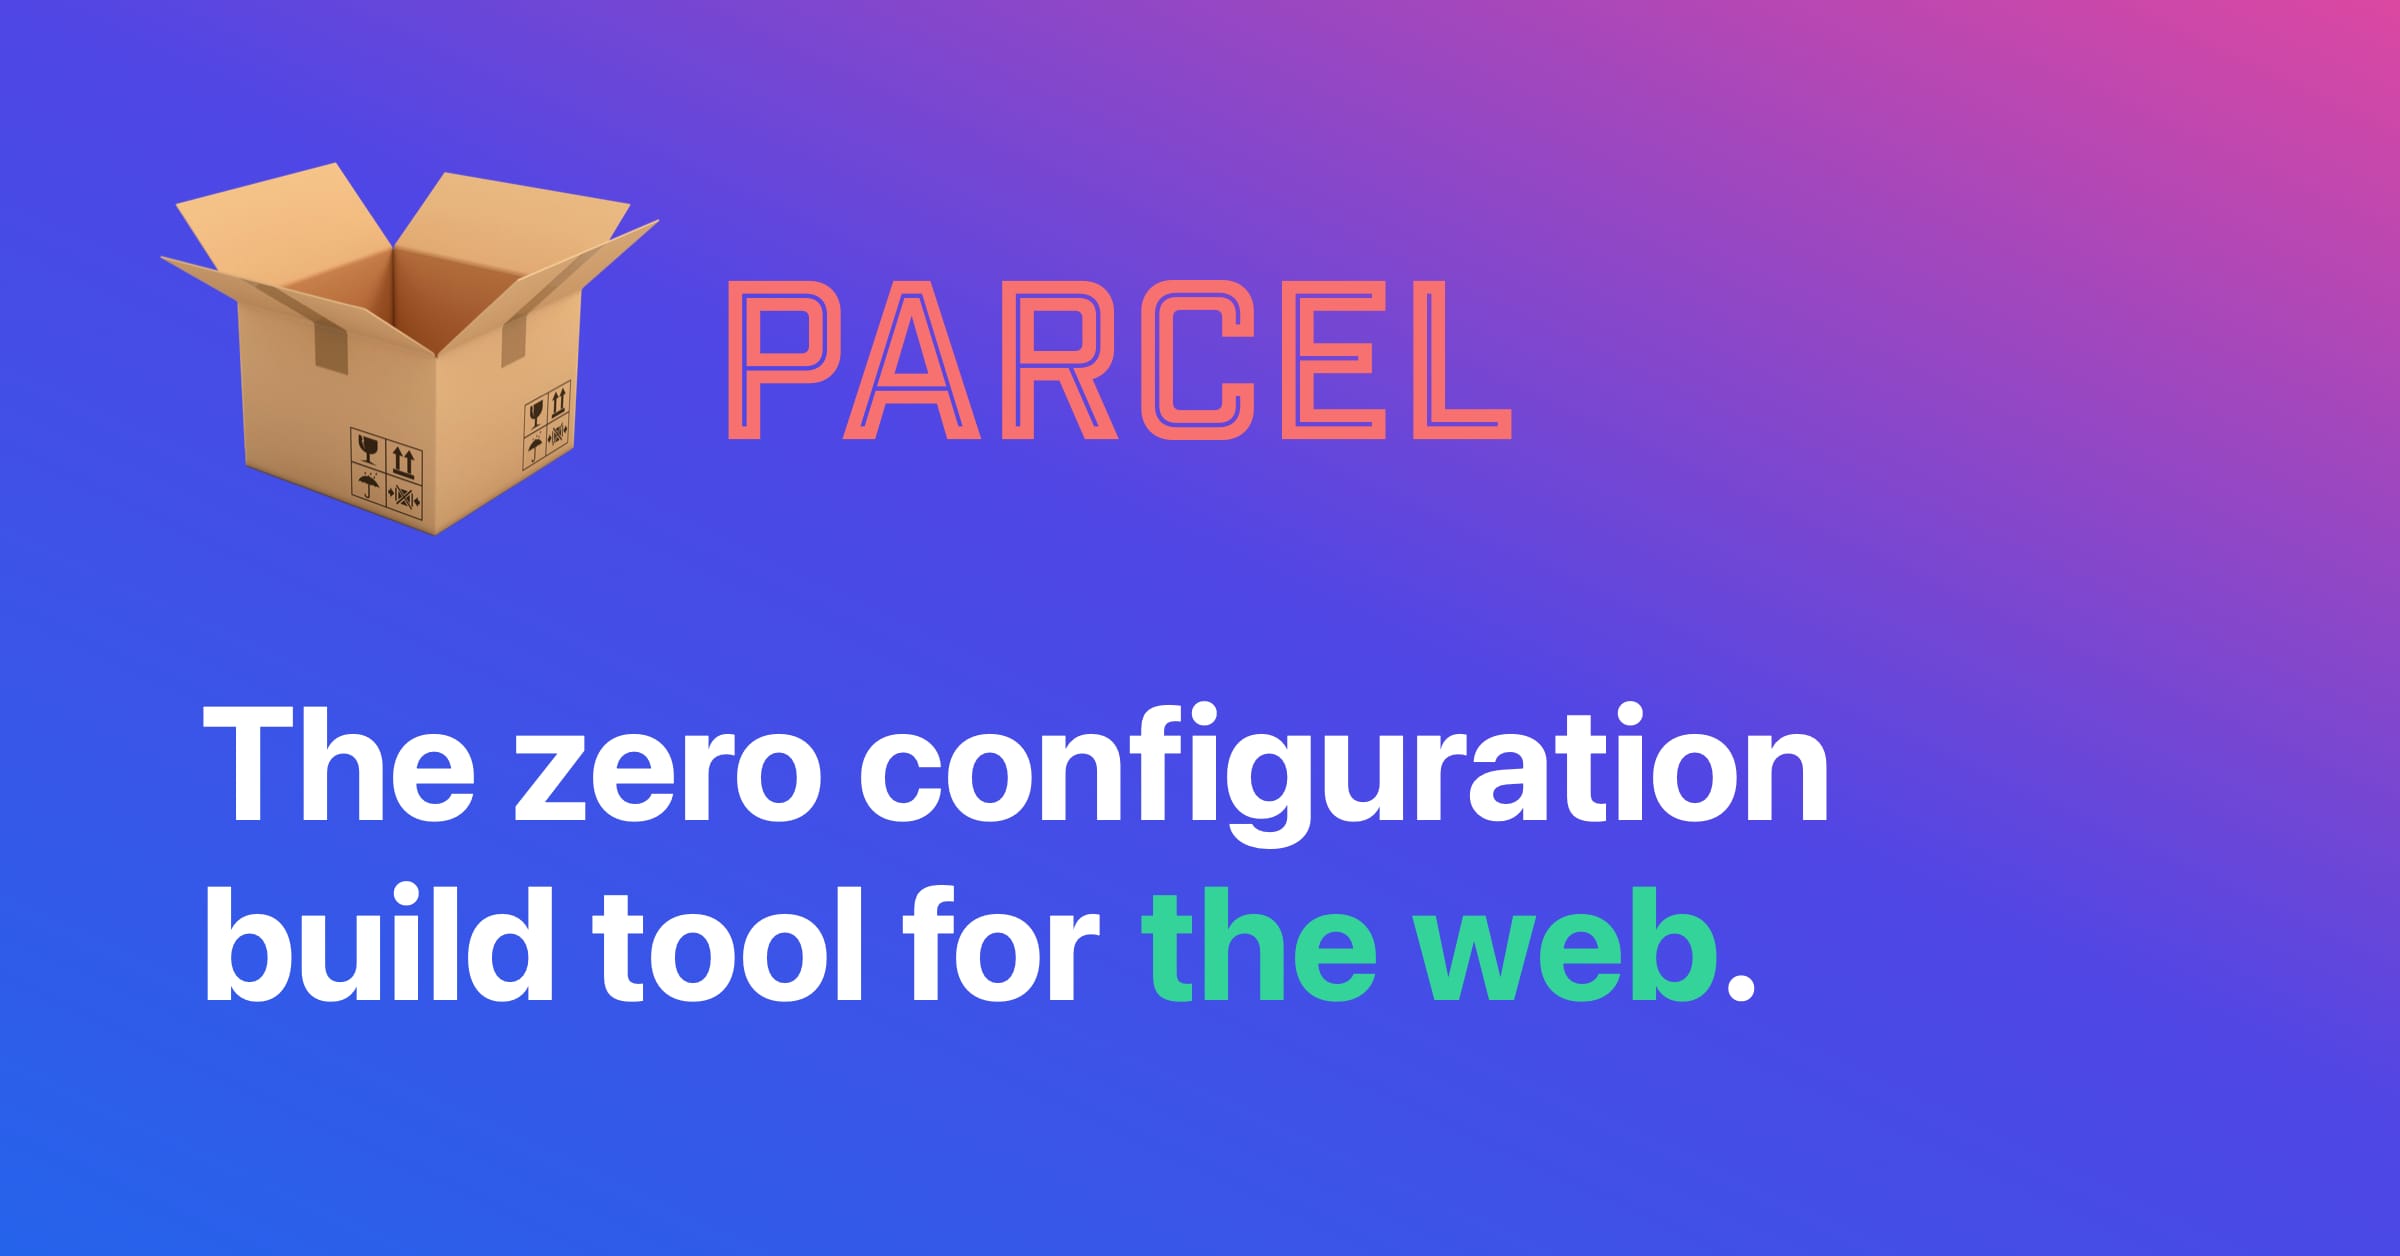 Parcel – The zero configuration build tool for the web.